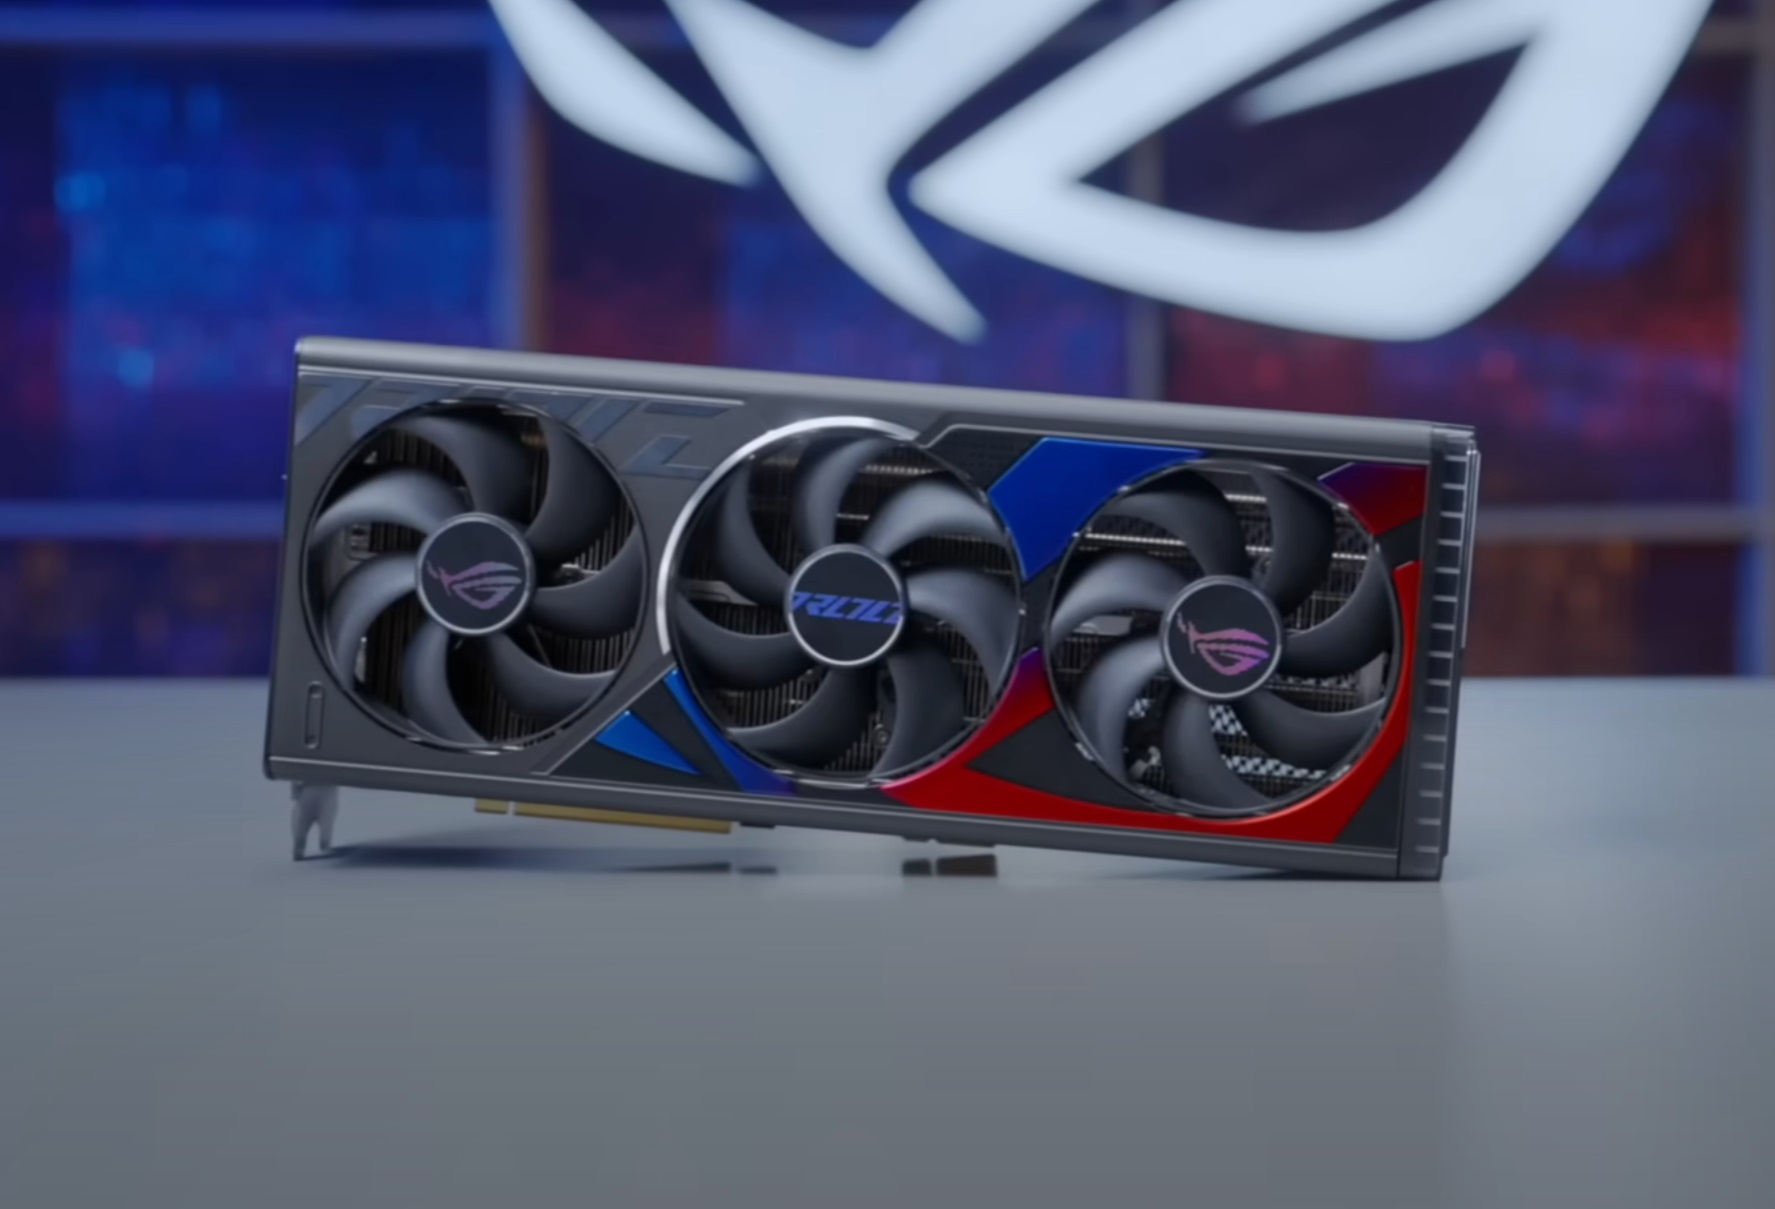 We’re hands-on with ASUS’ cable-free ROG Strix RTX 4090 BTF GPU at CES